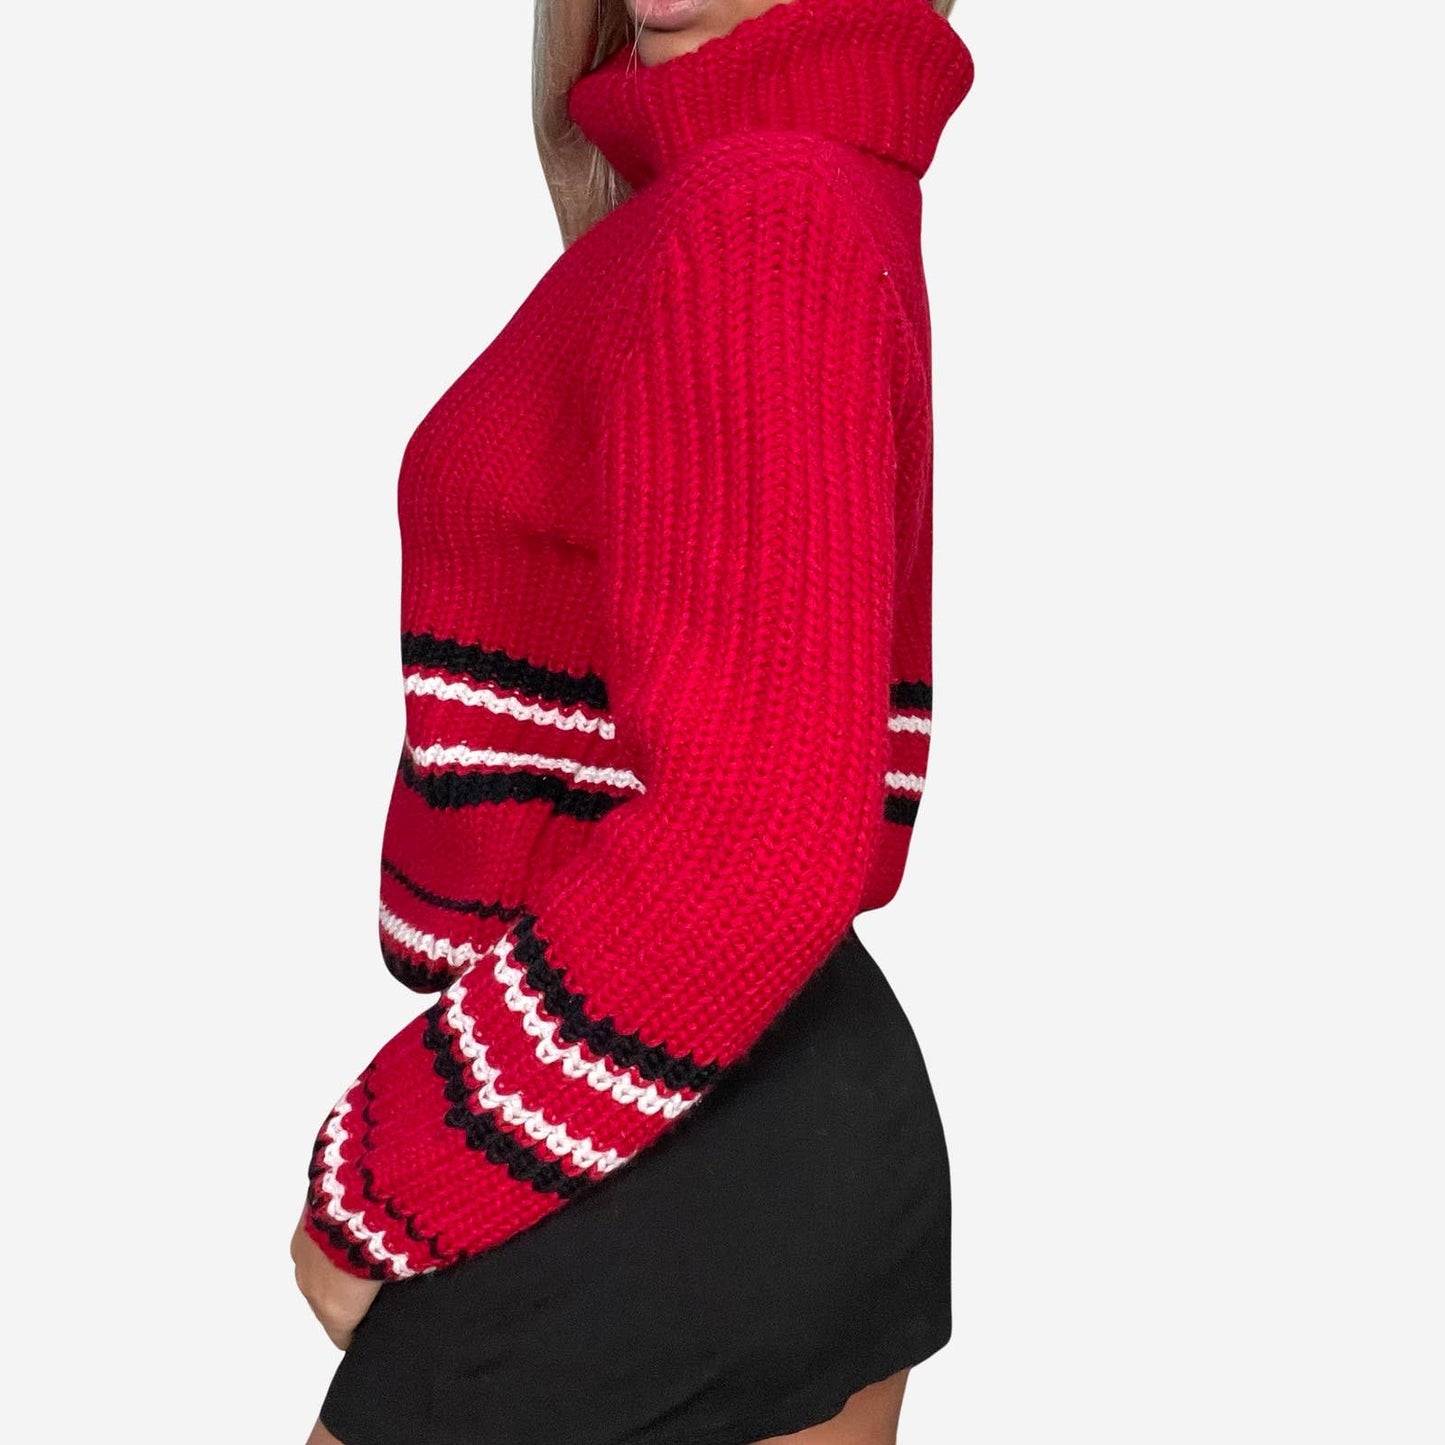 Vintage 2000s Red Knit Sweater with Stripe Pattern (XS-M)